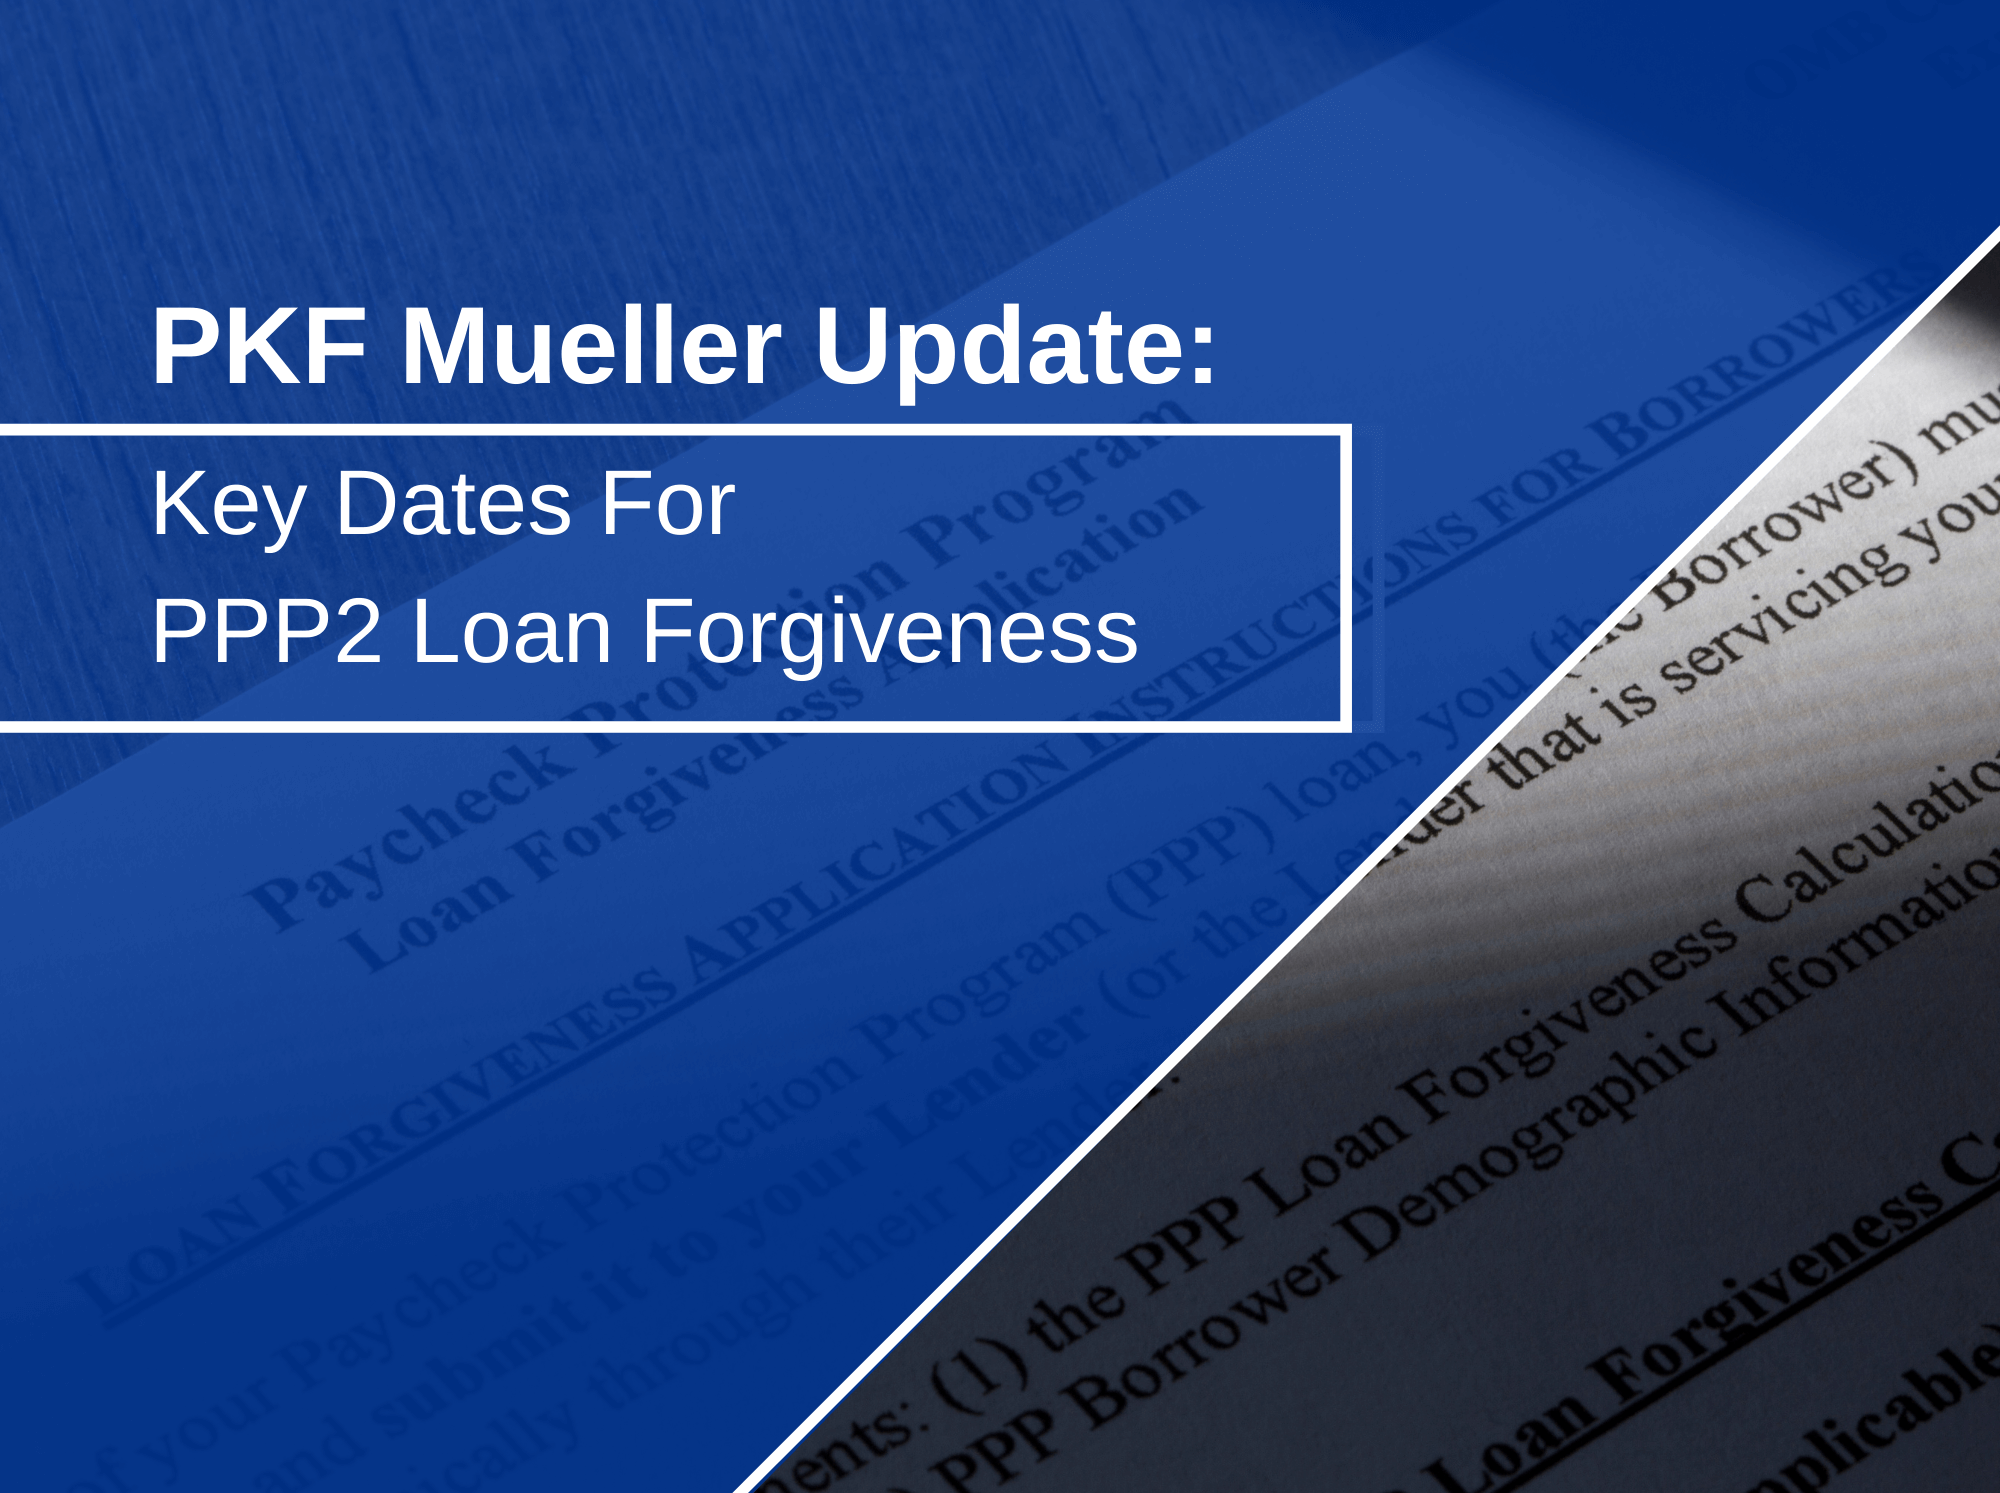 Key Dates for PPP2 Loan Forgiveness